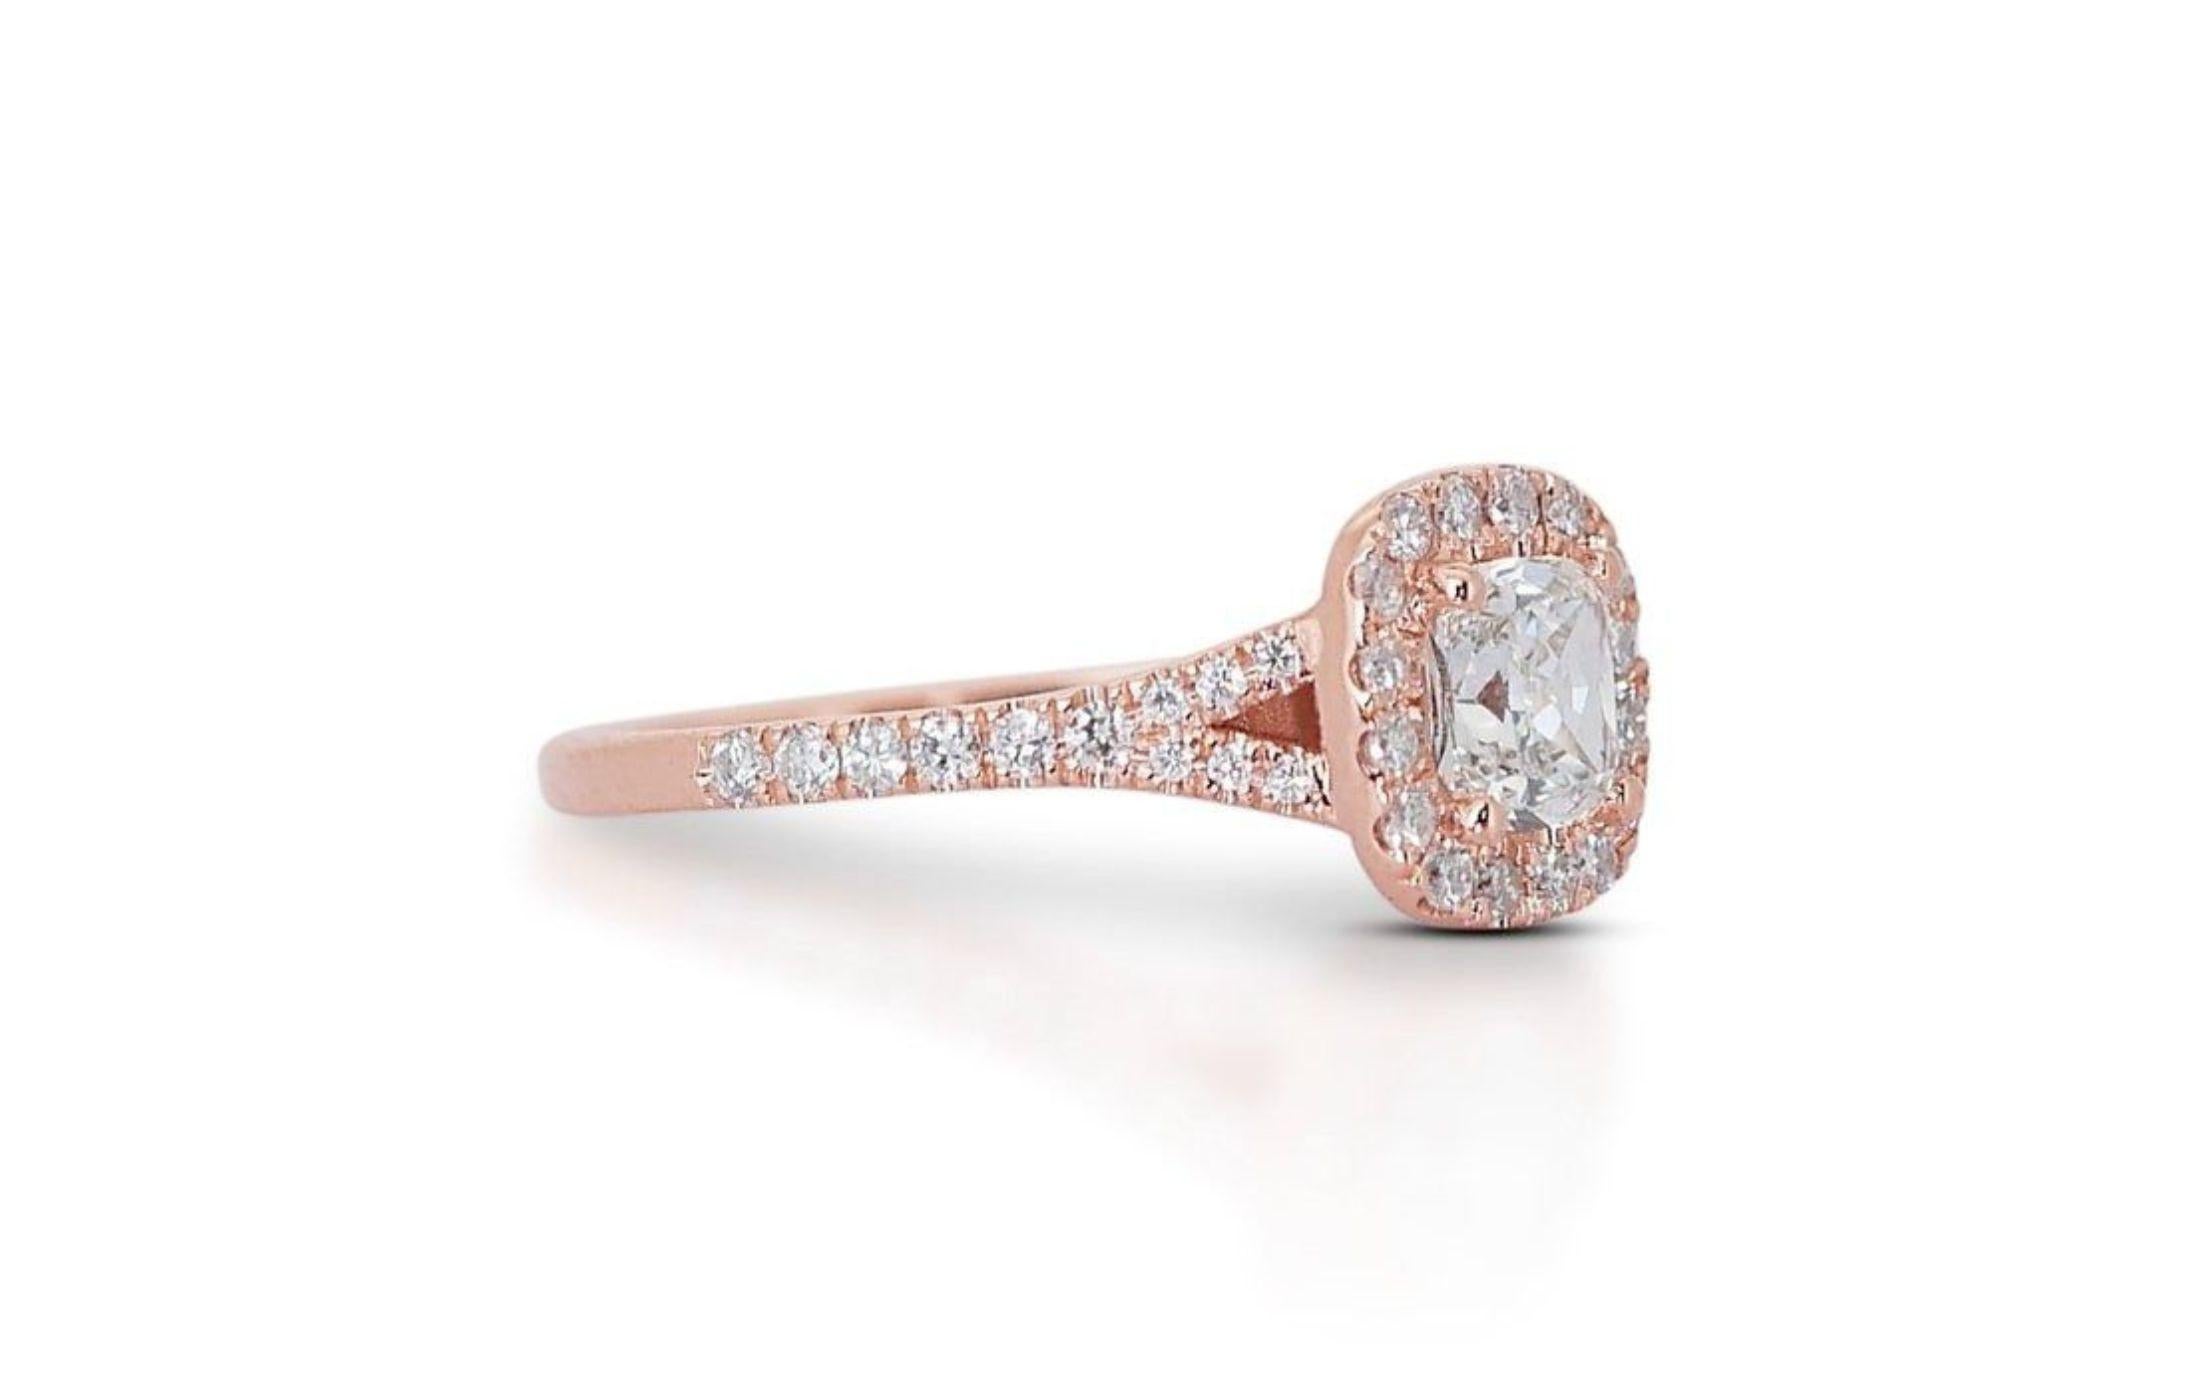 Women's 18K Rose Gold Diamond Ring with 1.03ct Natural Diamonds For Sale